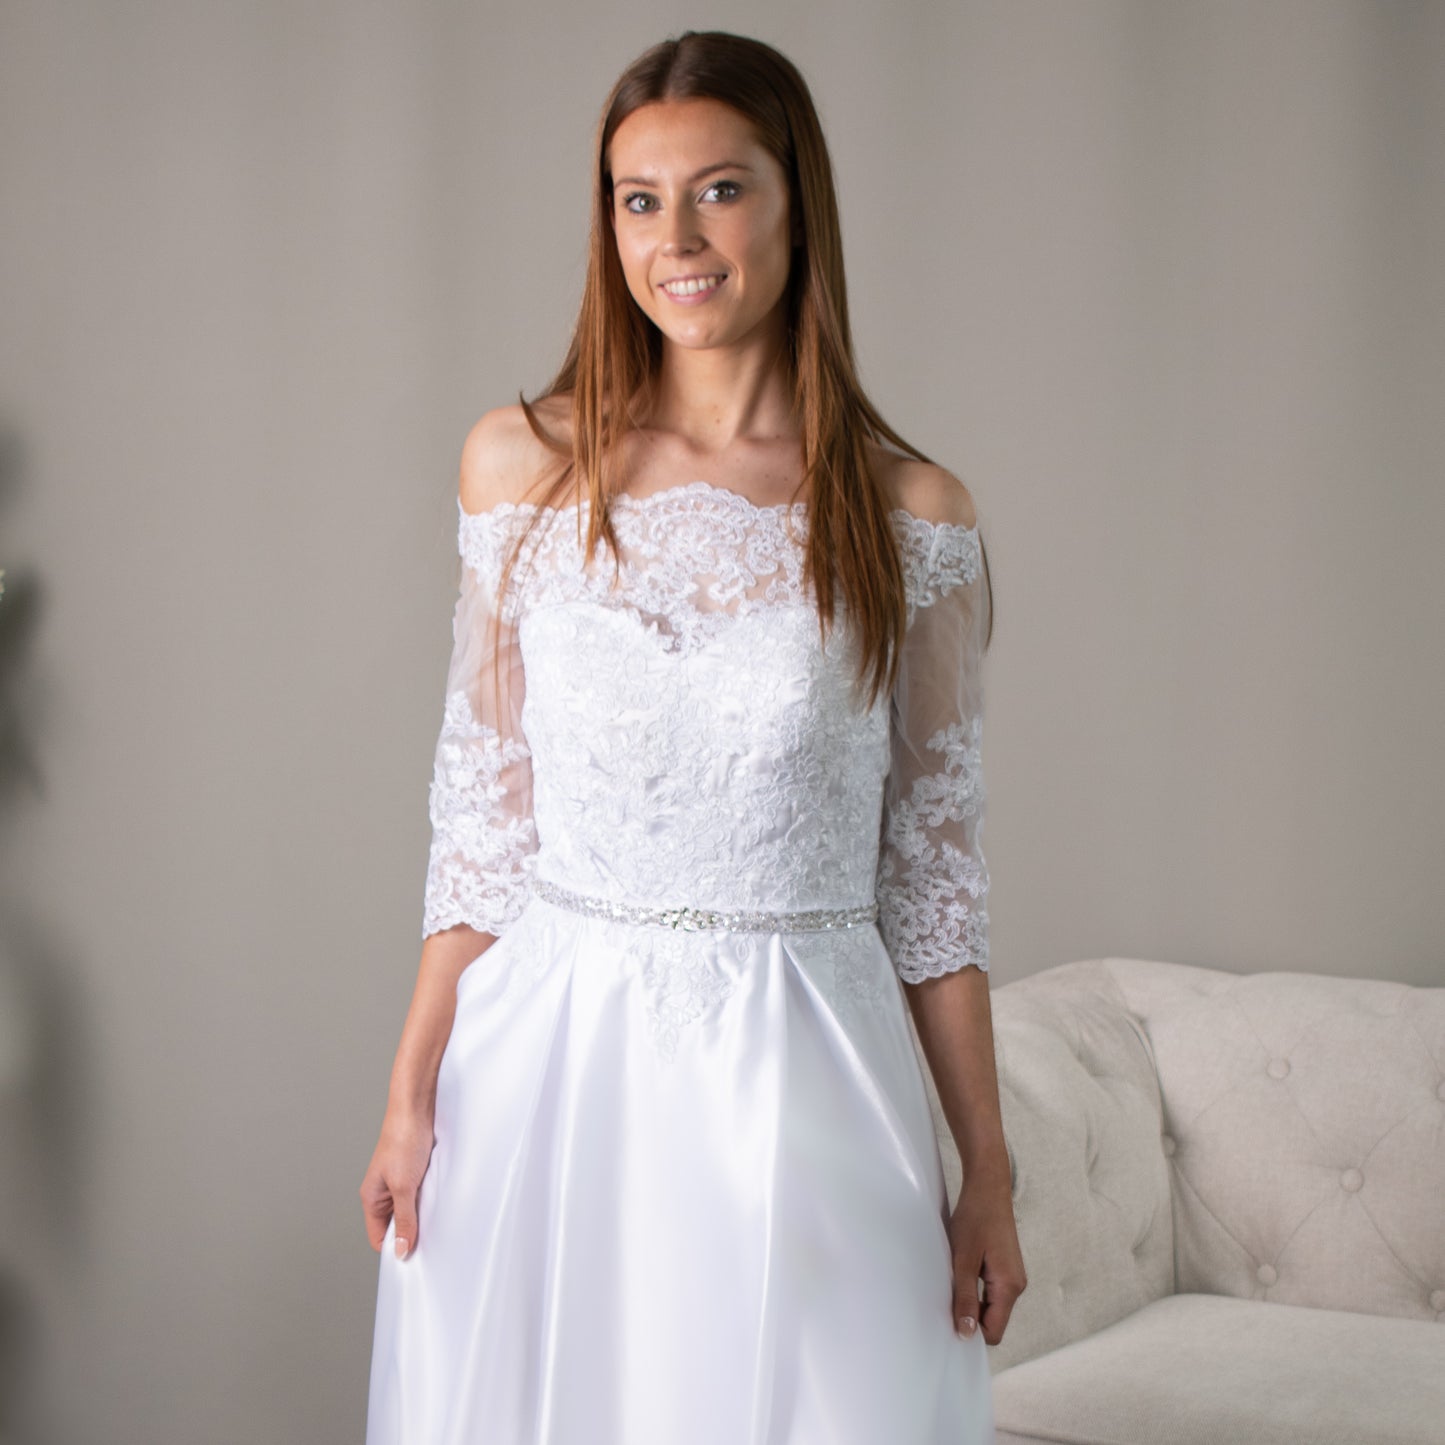 "Elizabeth satin debs dress with lace detailing and A-line silhouette."